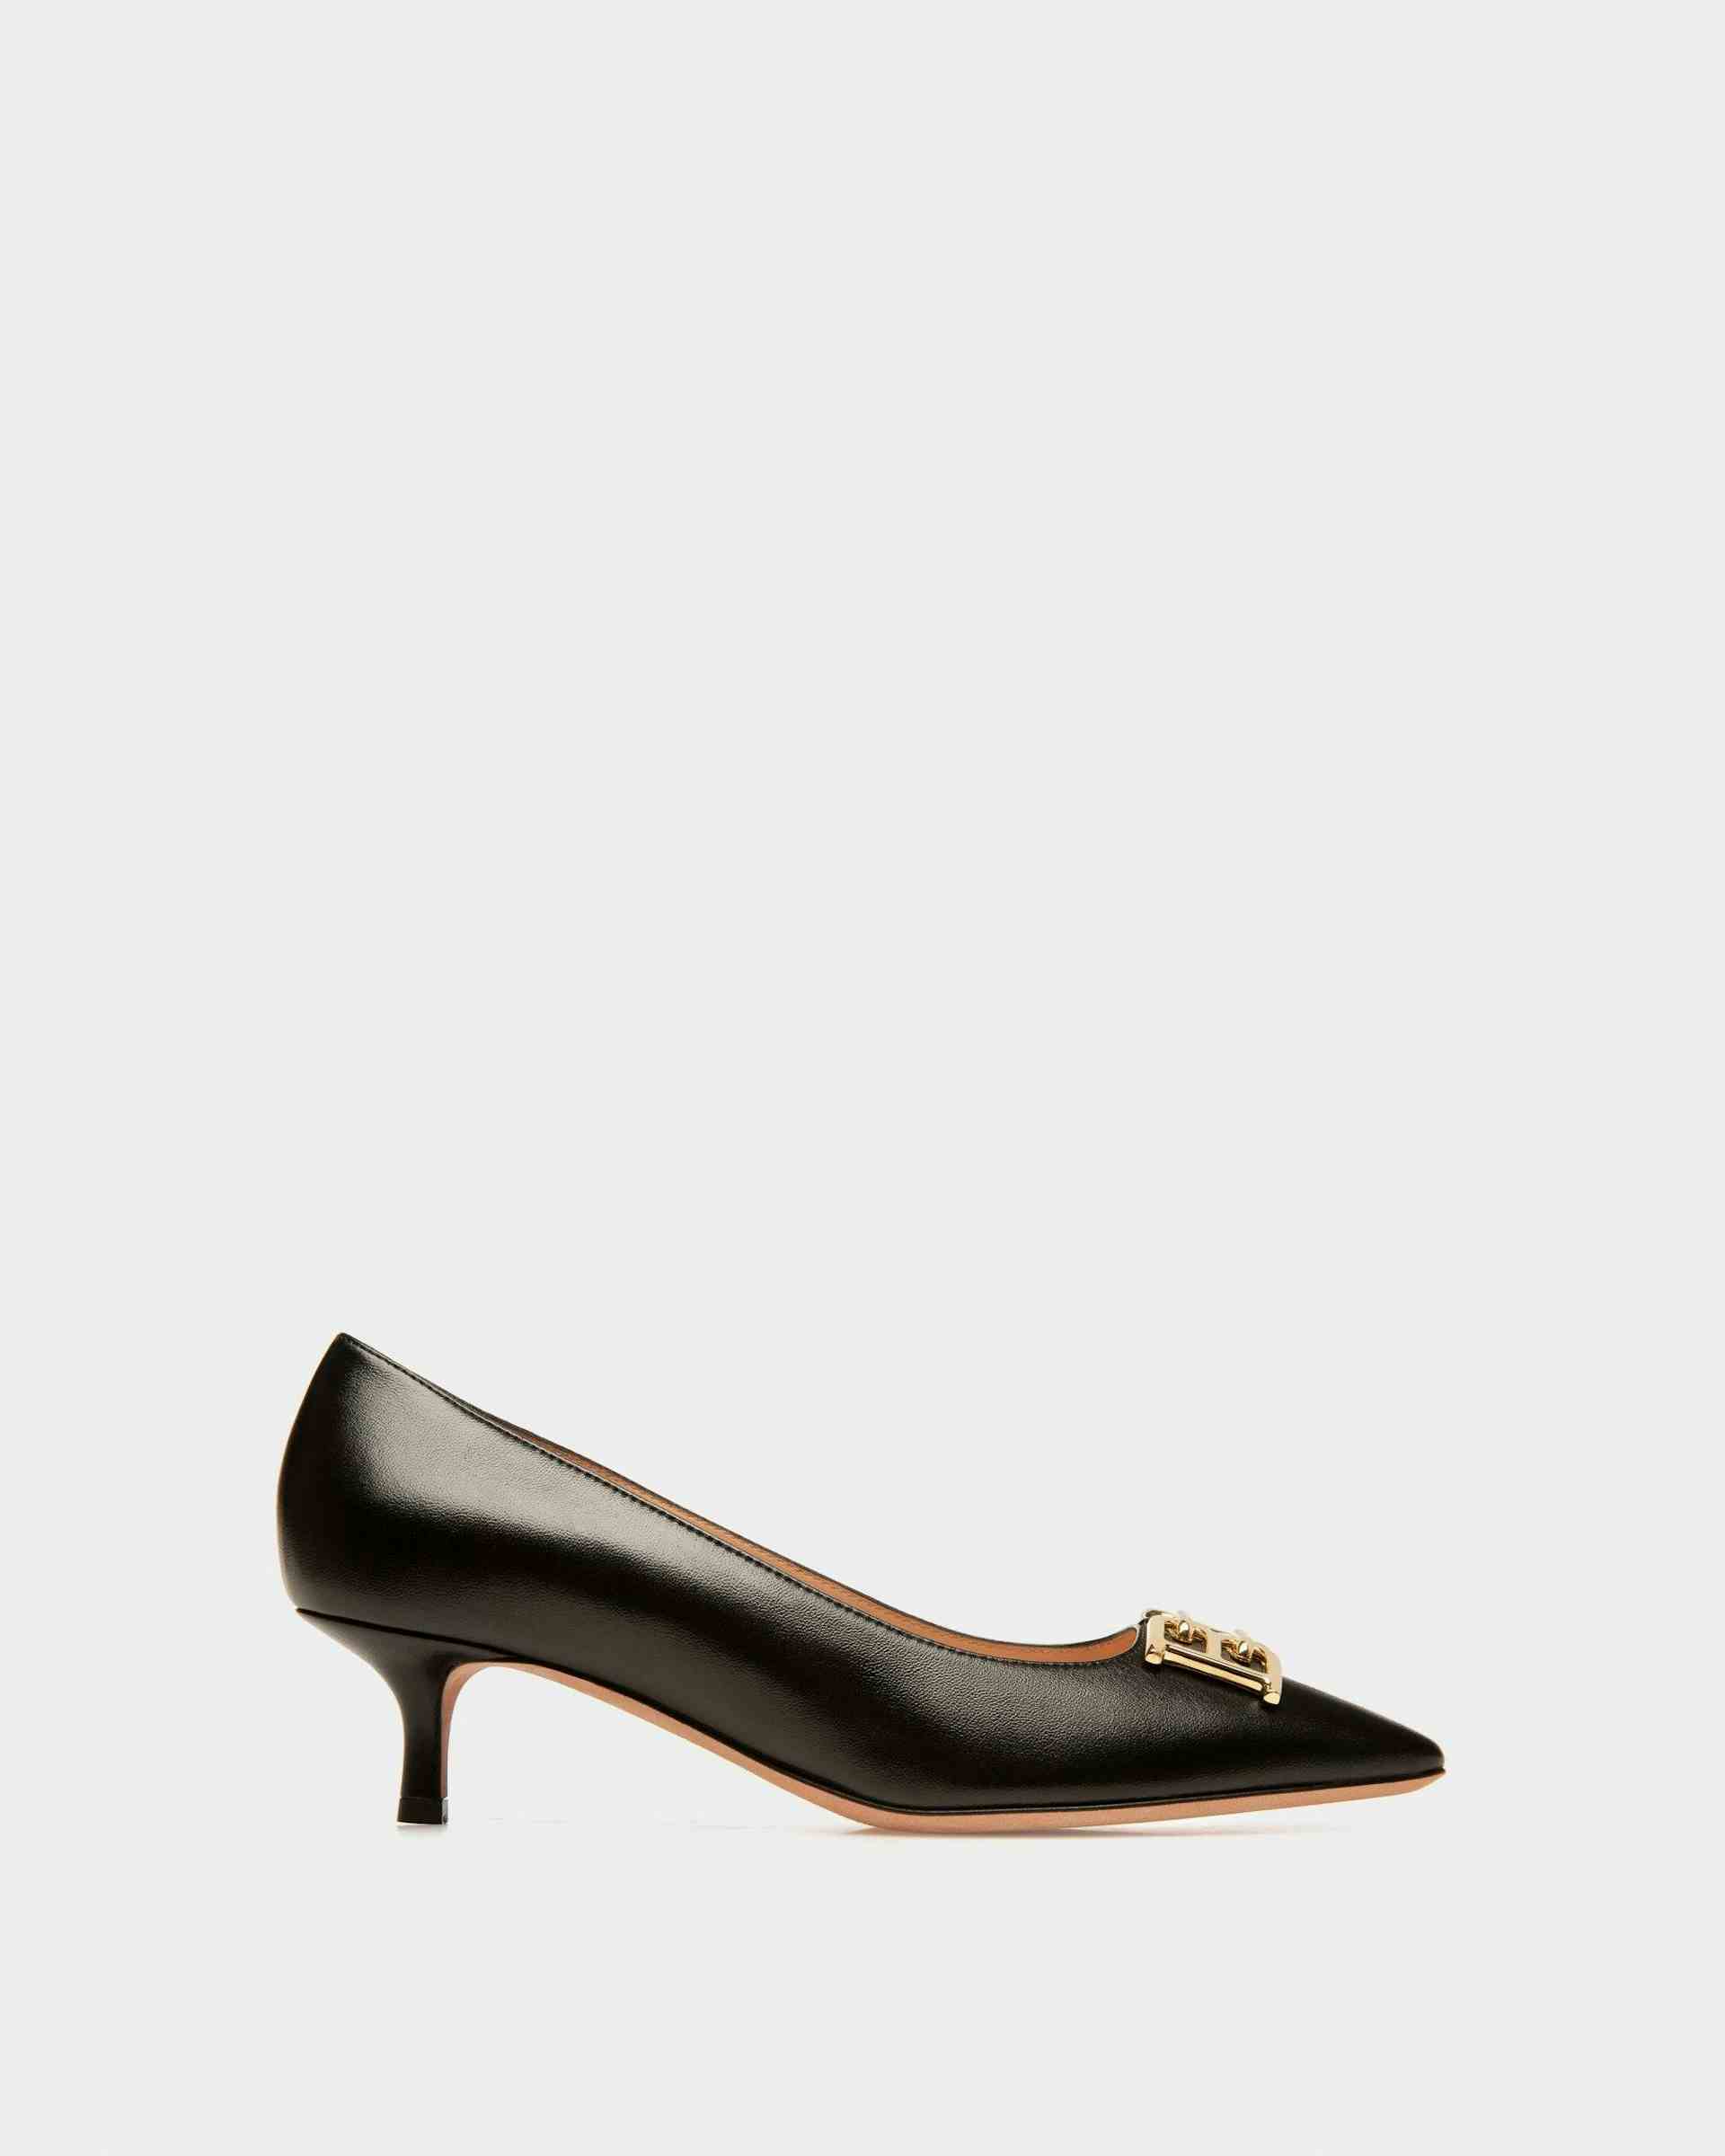 Evanca Leather Pumps In Black - Women's - Bally